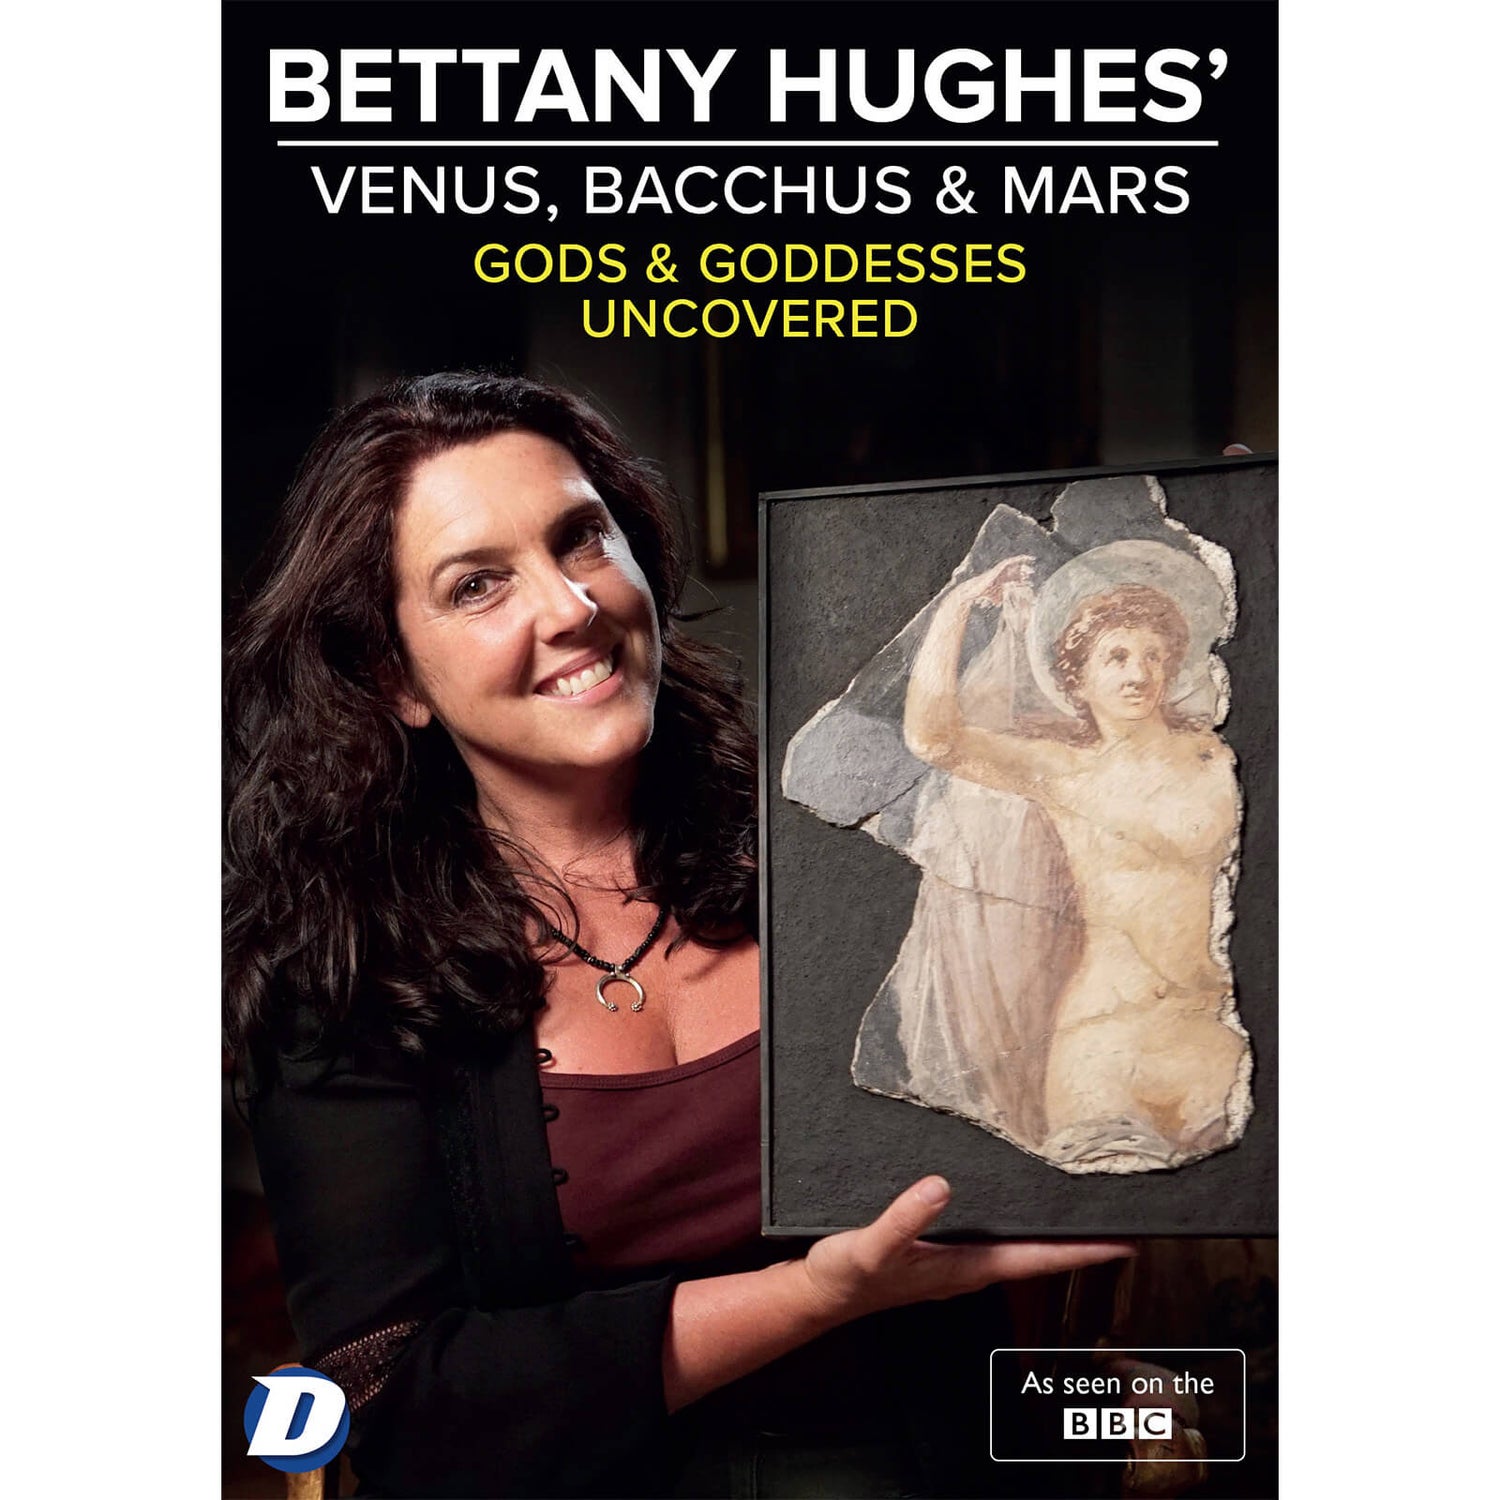 Bettany Hughes' Venus, Bacchus & Mars Uncovered